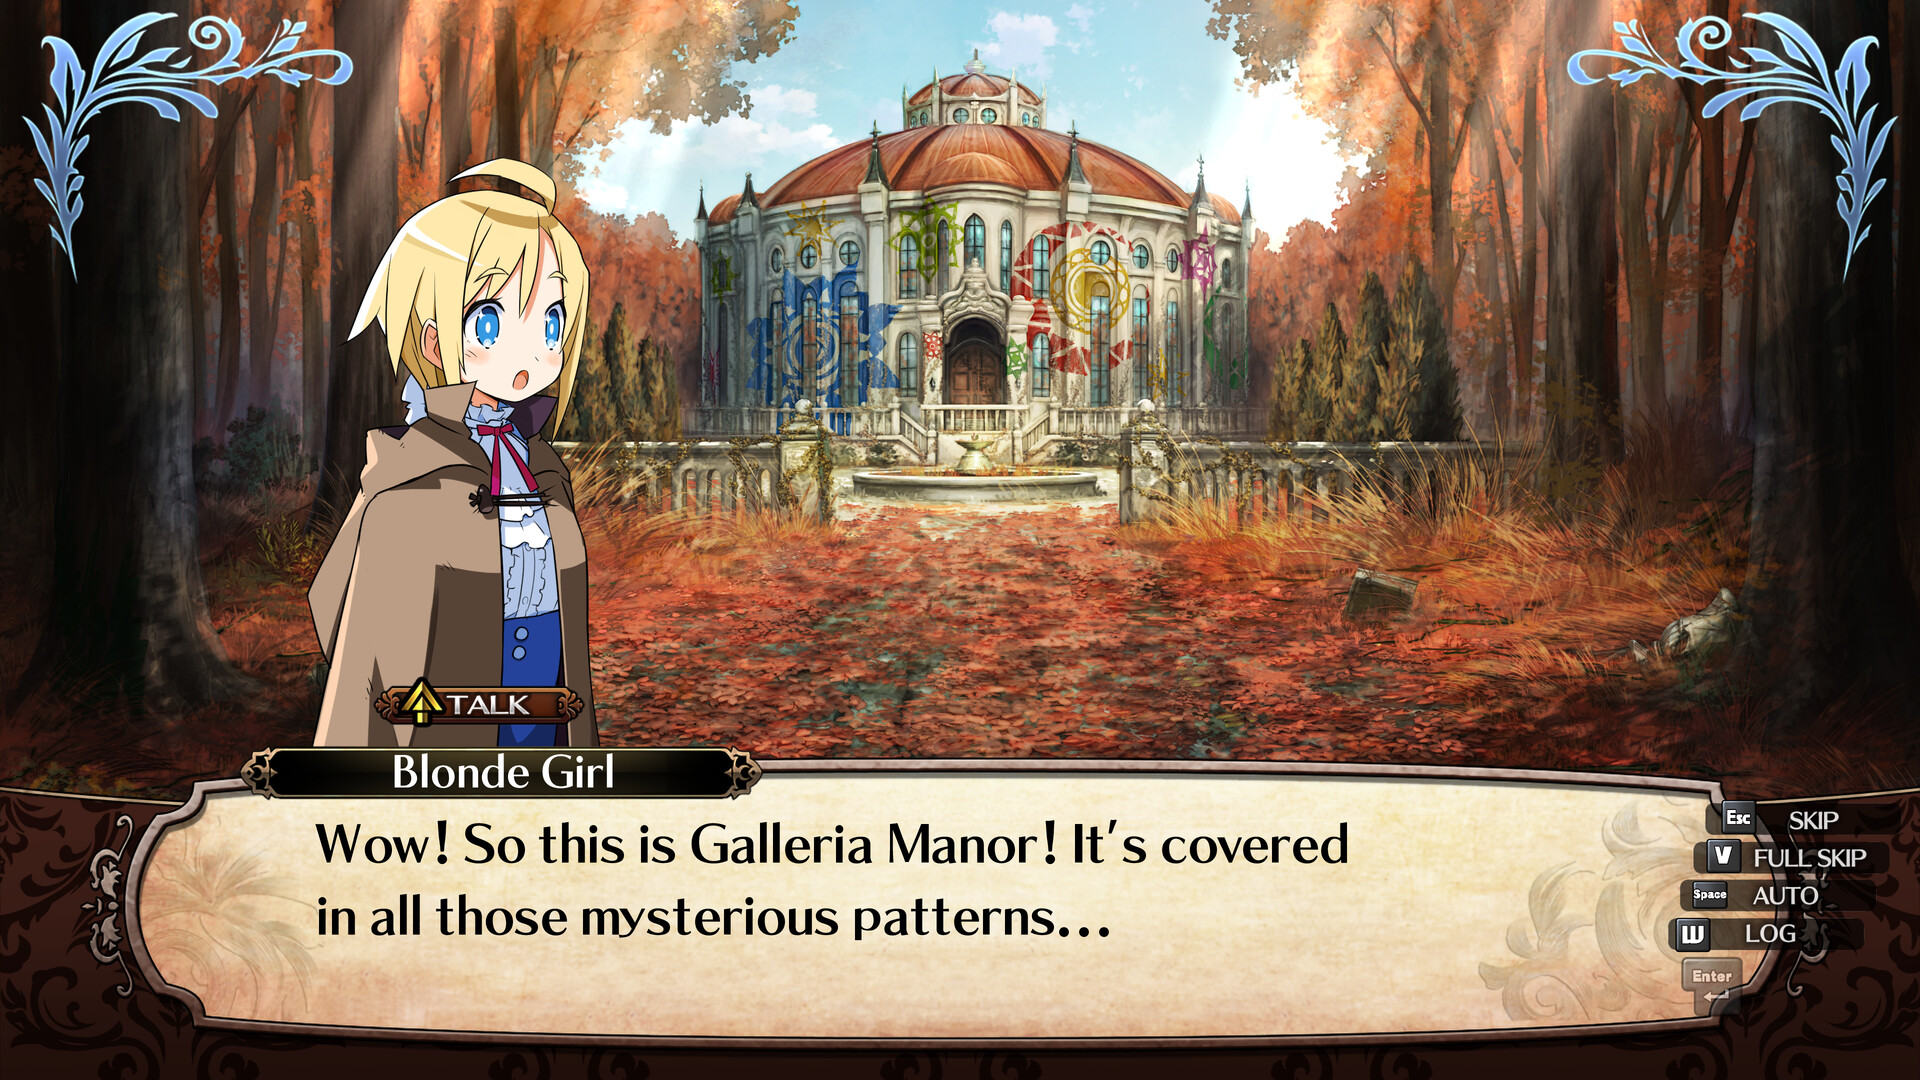 Labyrinth Of Galleria: The Moon Society Steam CD Key